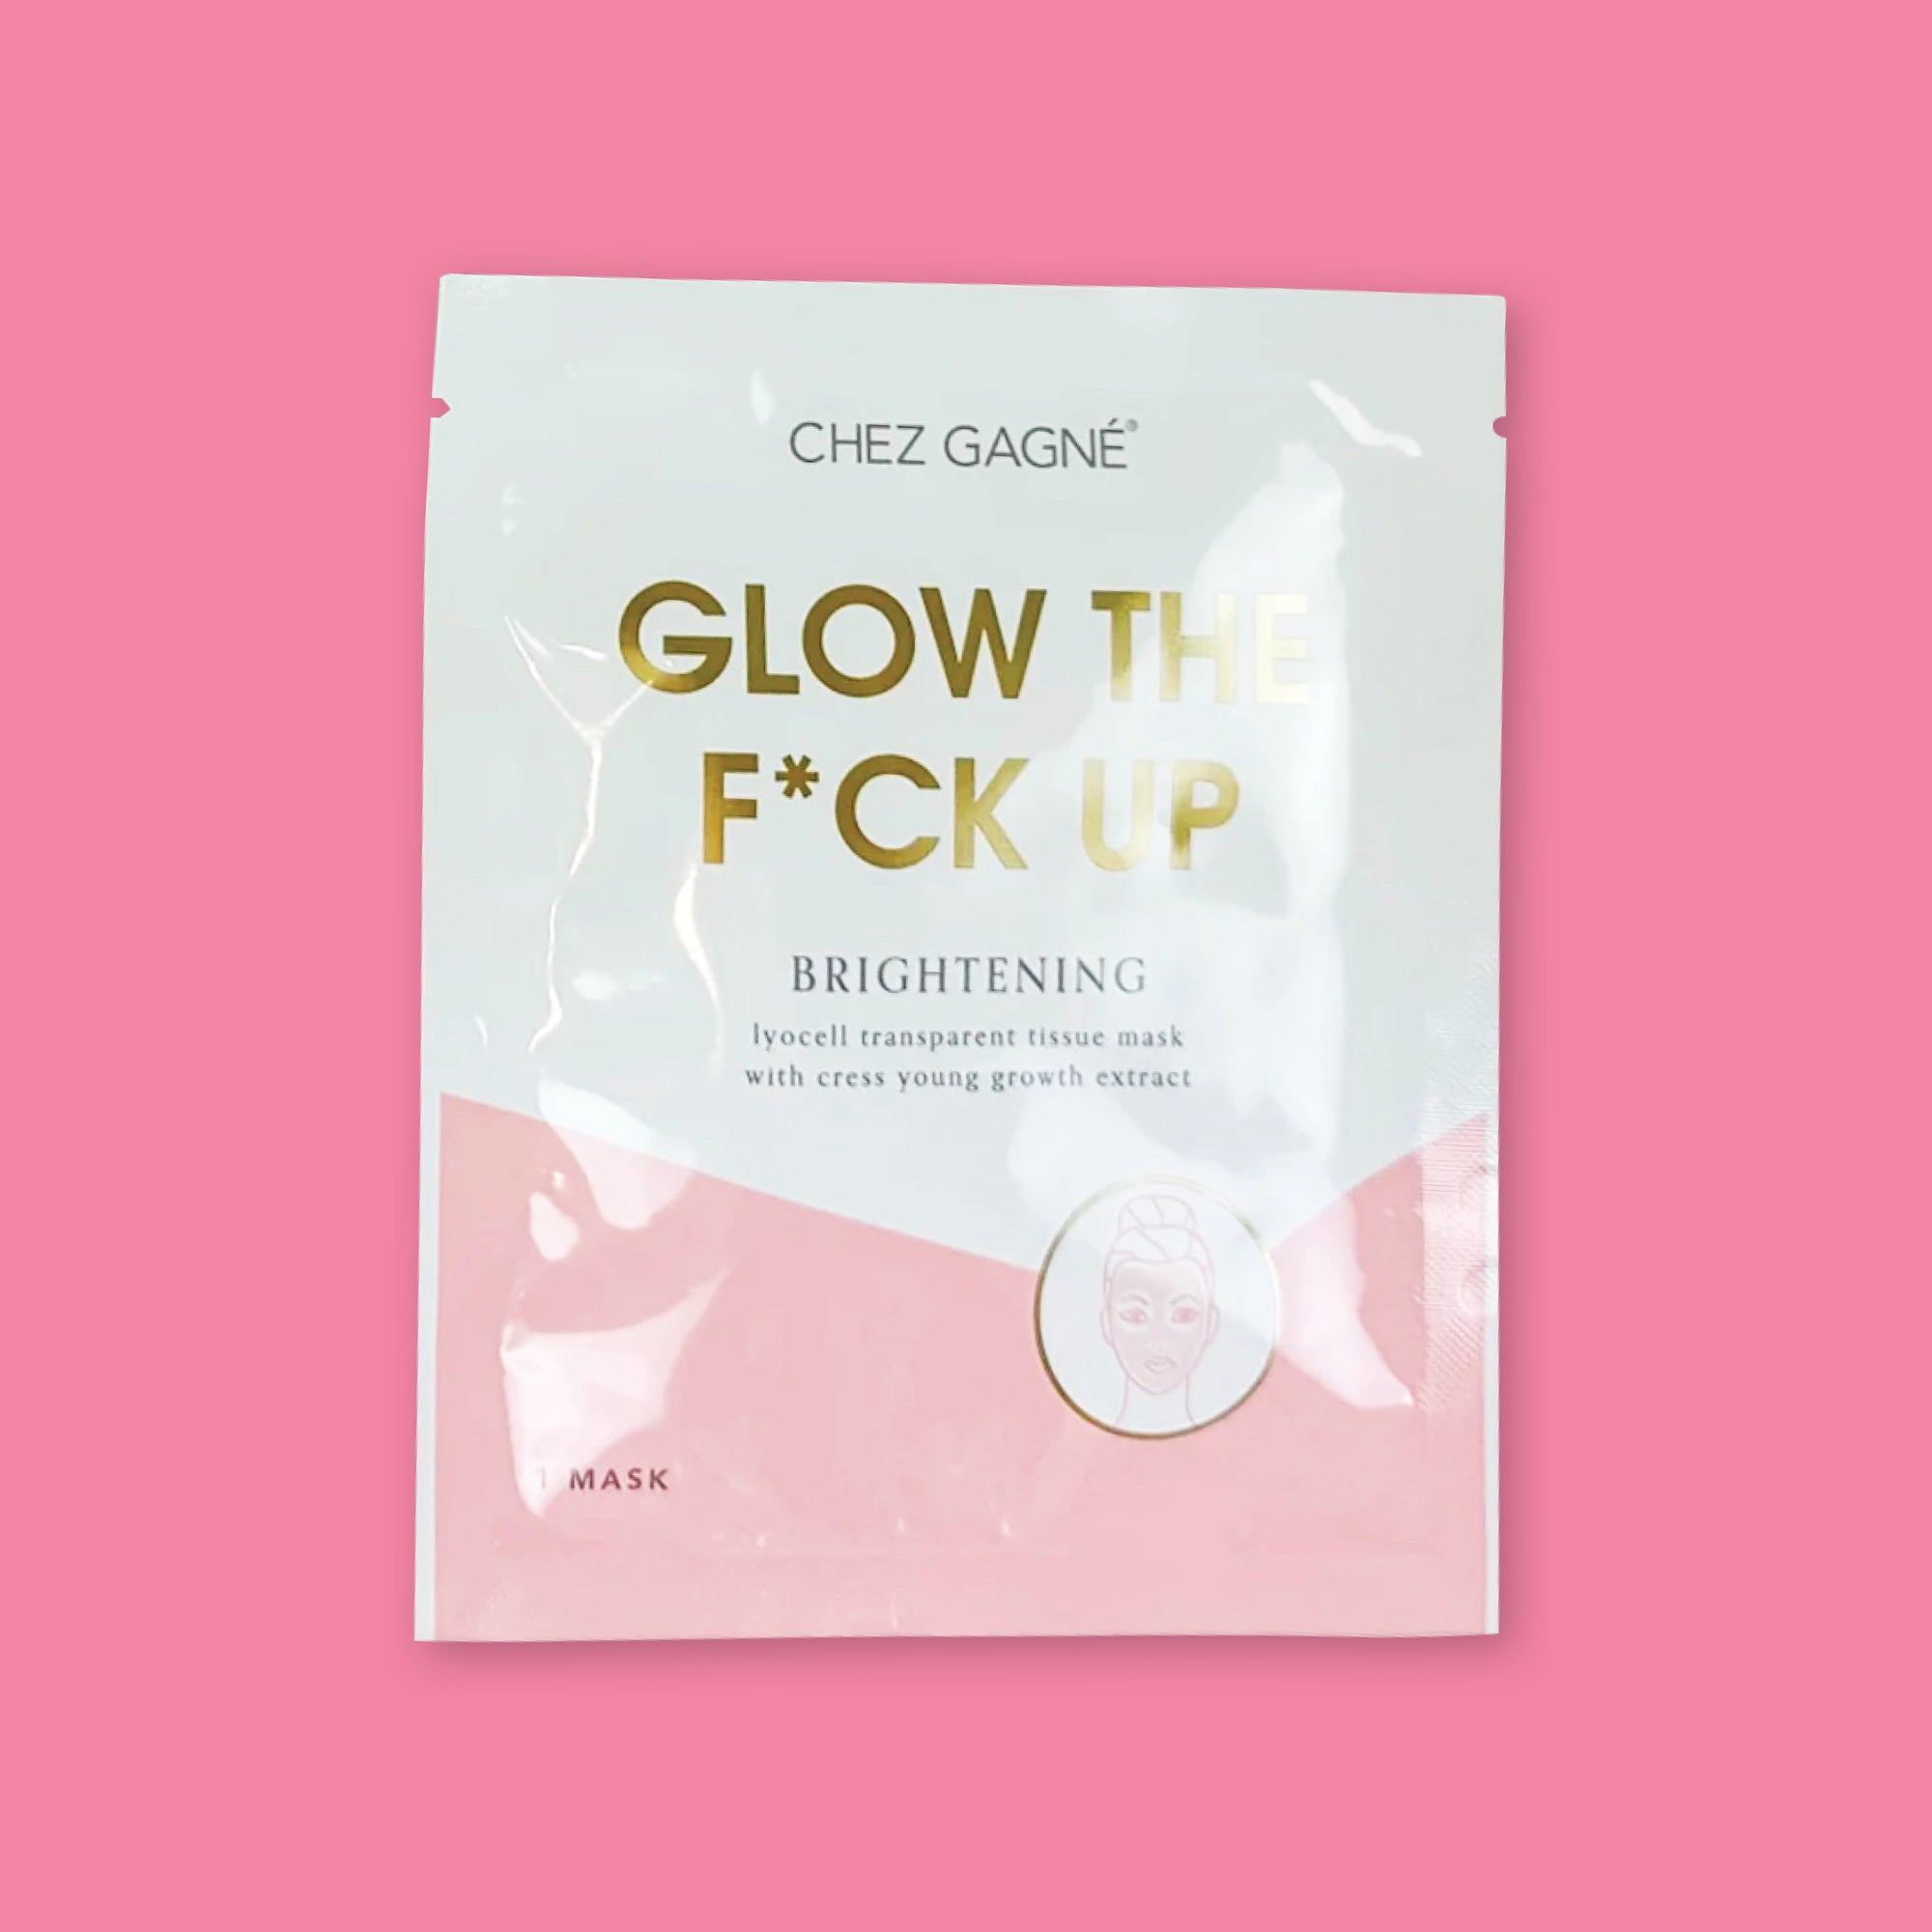 On a bubblegum pink background is a package. It is white and light pink and has an illustration of a woman's face with a mask on it. It says "CHEZ GAGNE" in black, all caps font. It also says "GLOW THE F*CK UP" in gold, all caps block font. "Brightening lyocell tranparent tissue mask with cress young growth extract" in black, serif font. 1 mask